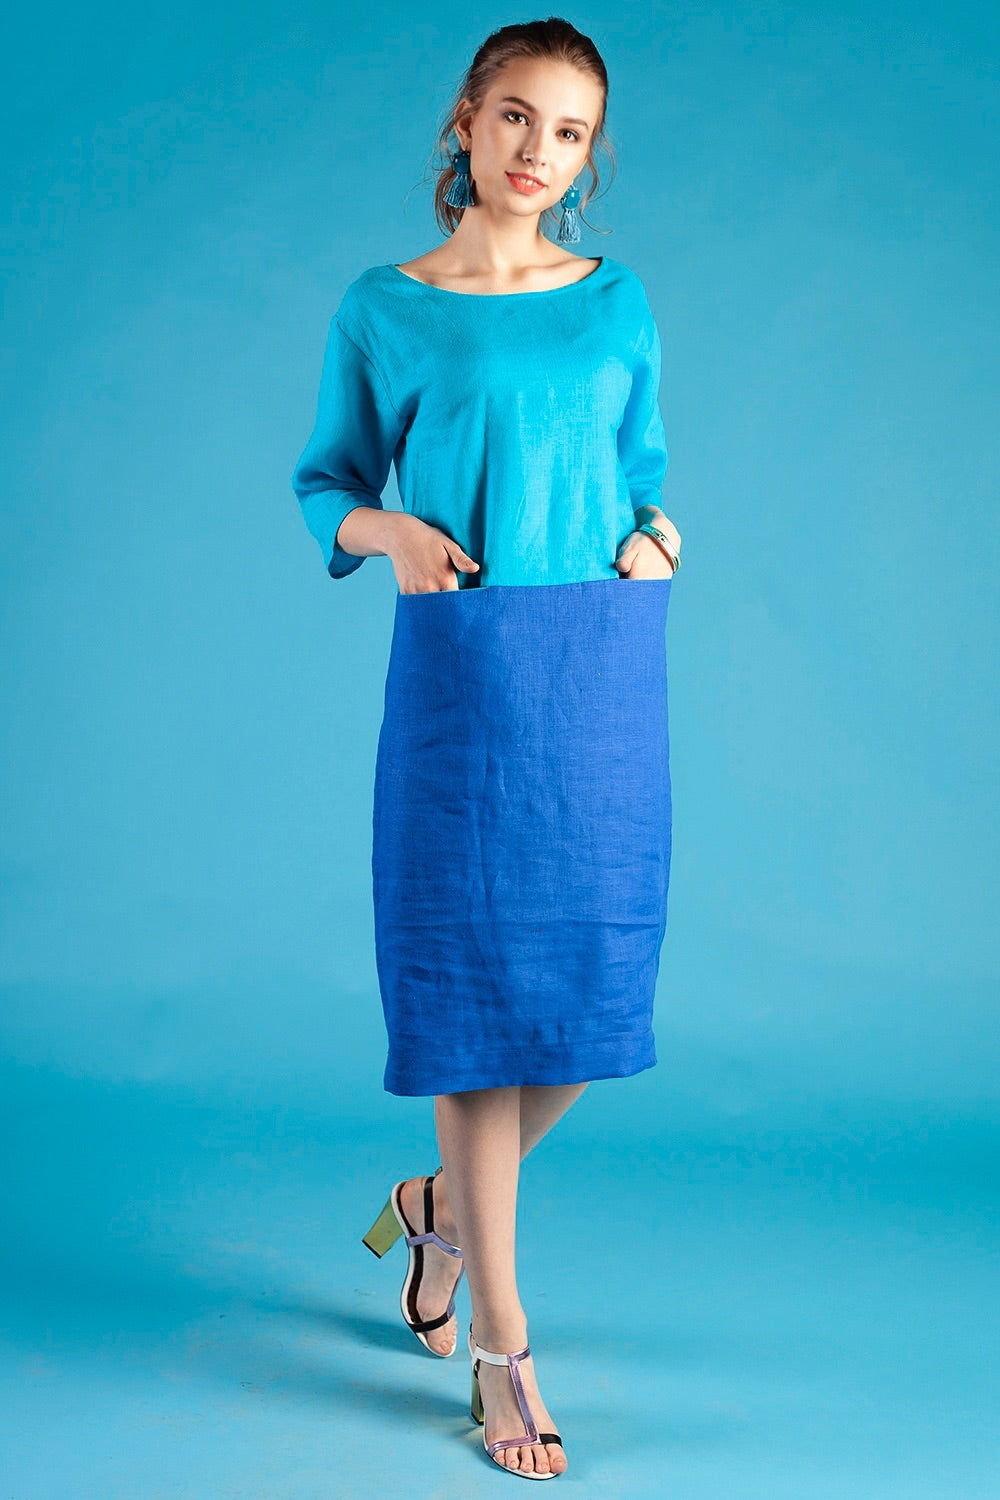 Two-tone linen dress with pockets on the front